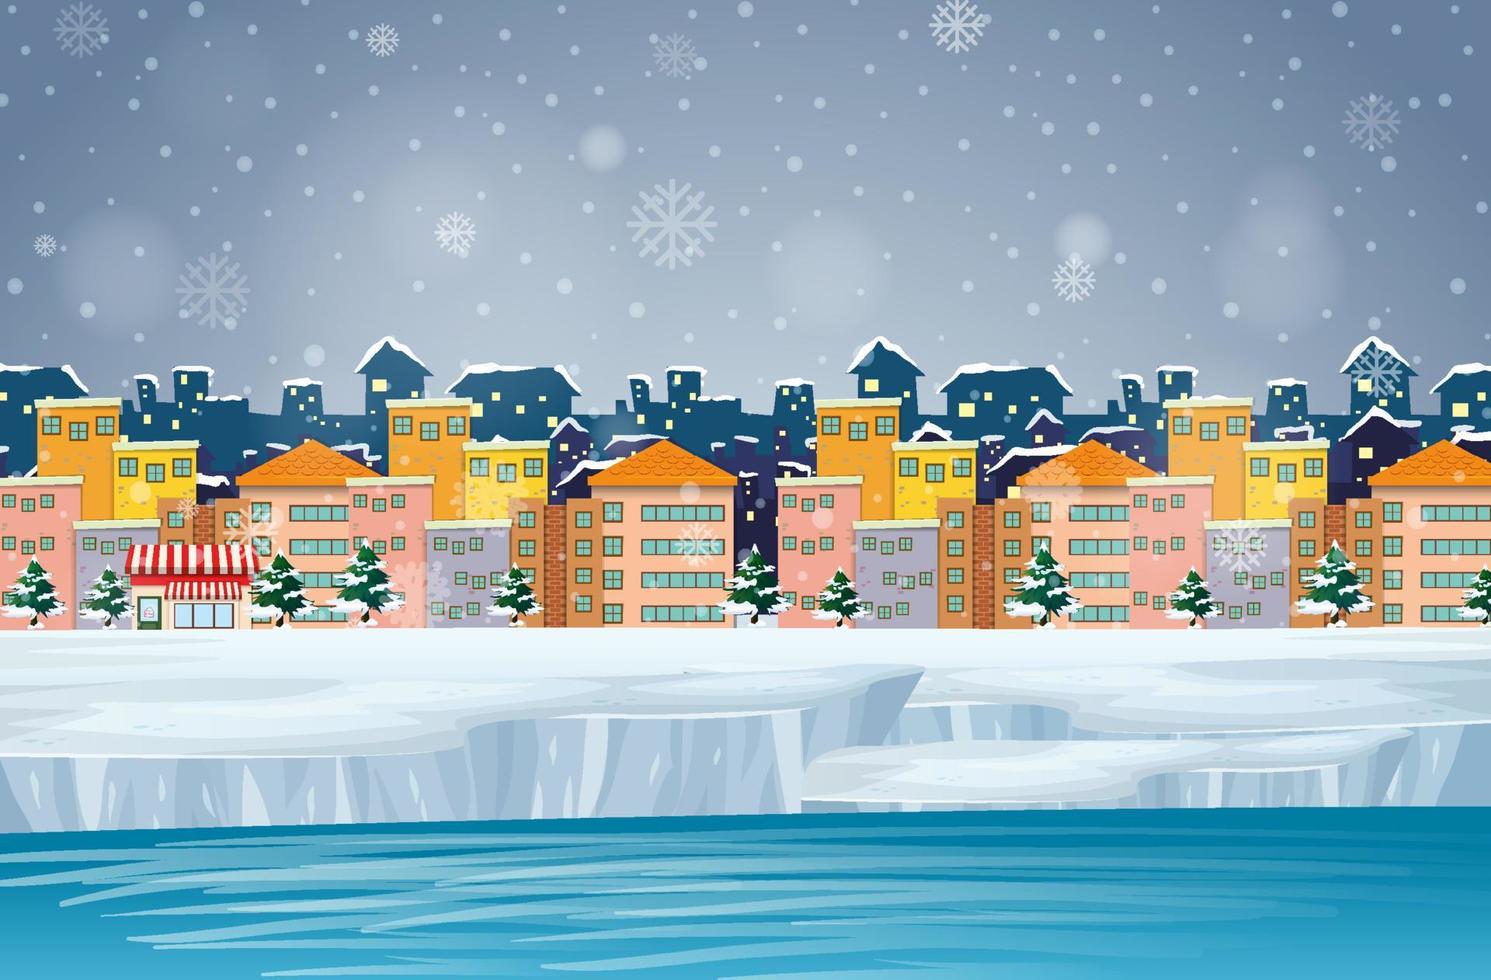 Snowy night in the city background vector